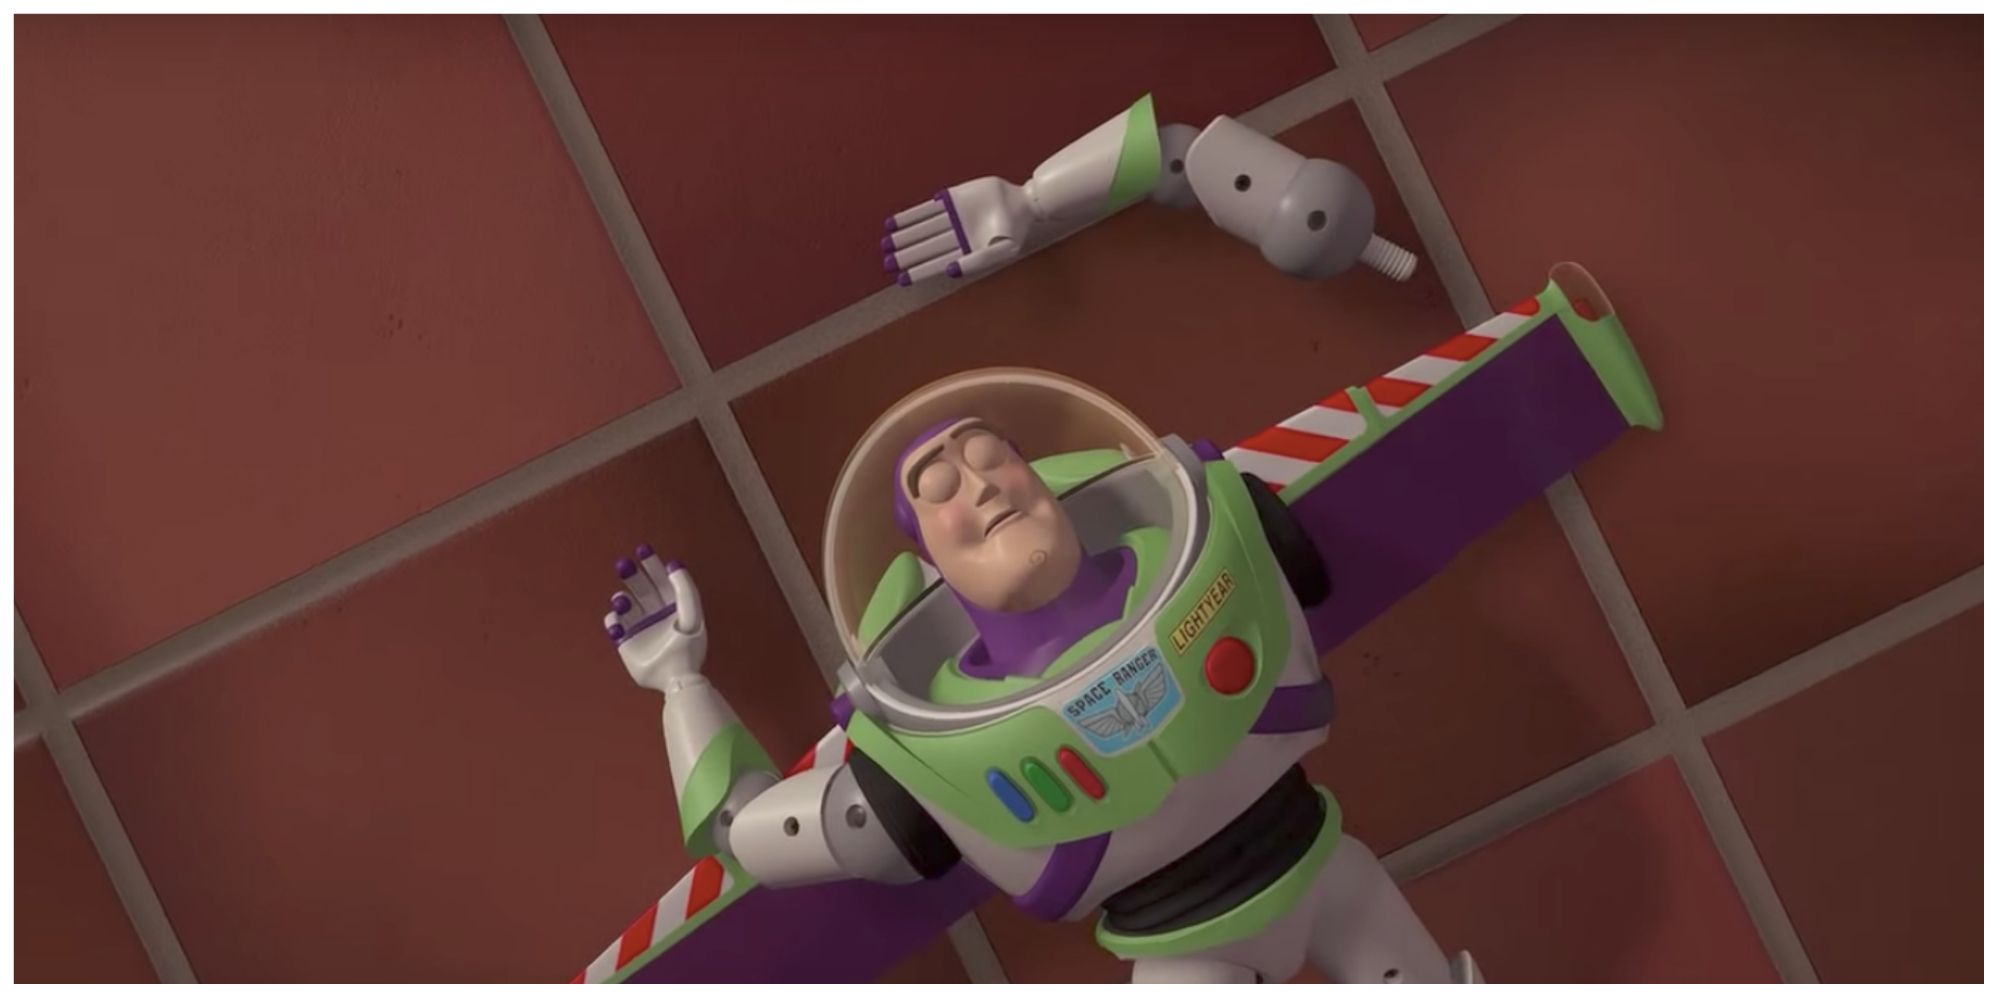 Buzz Lightyear loses his arm in Toy Story (1996).